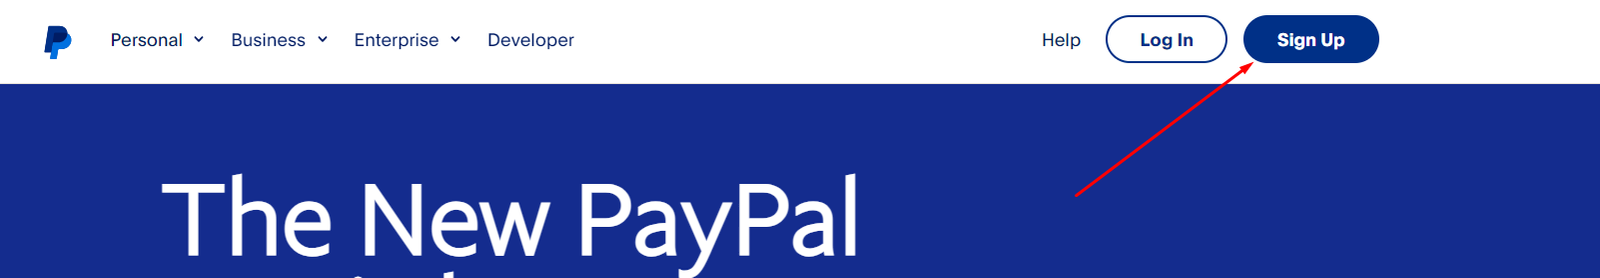 paypal-signup